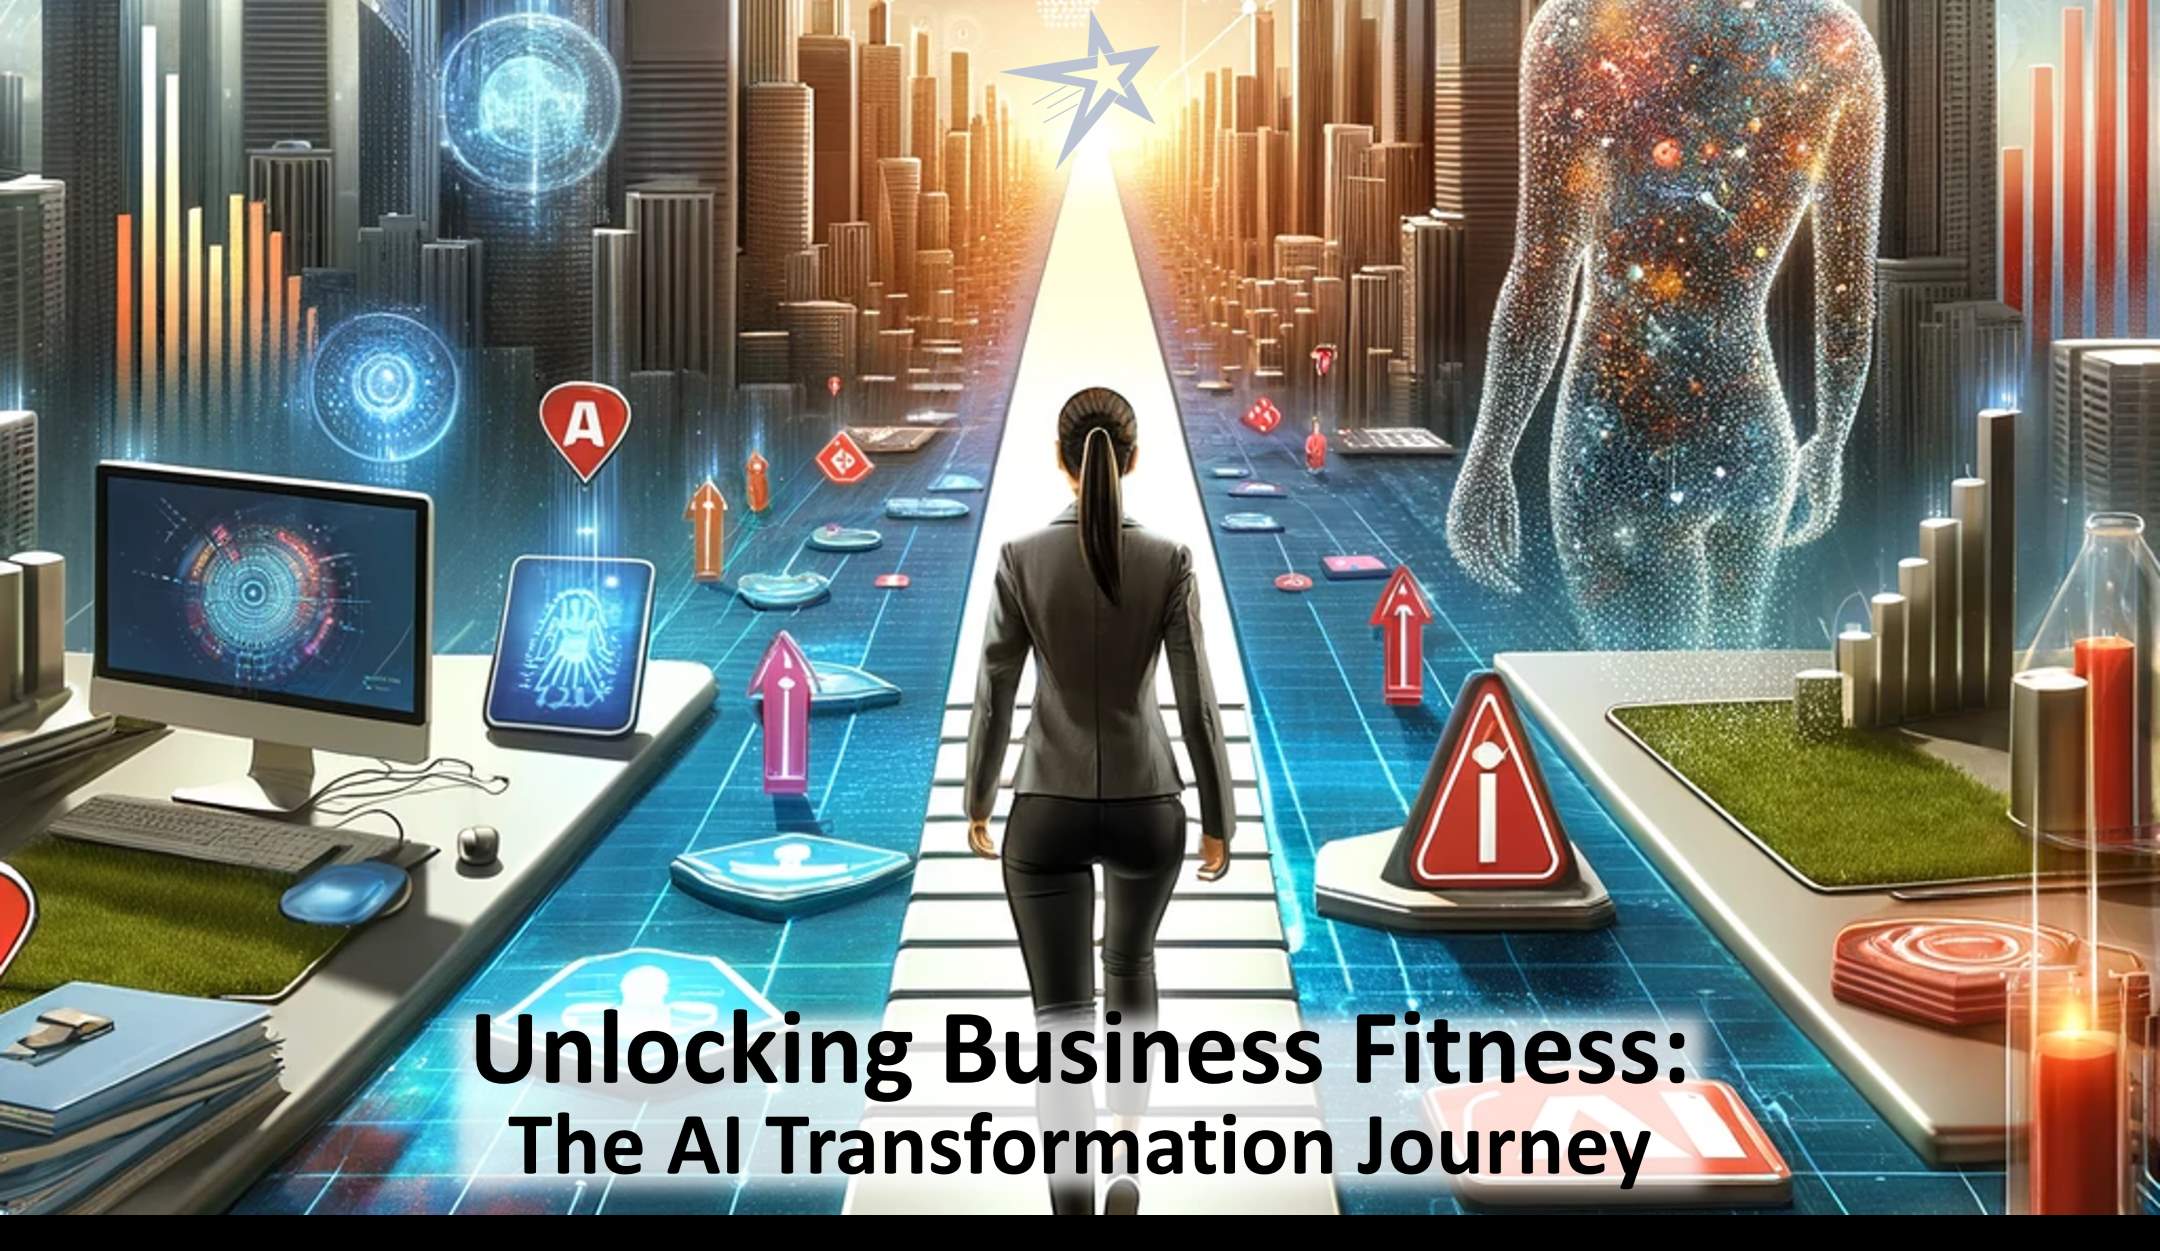 Unlocking Business Fitness - The AI Transformation Journey